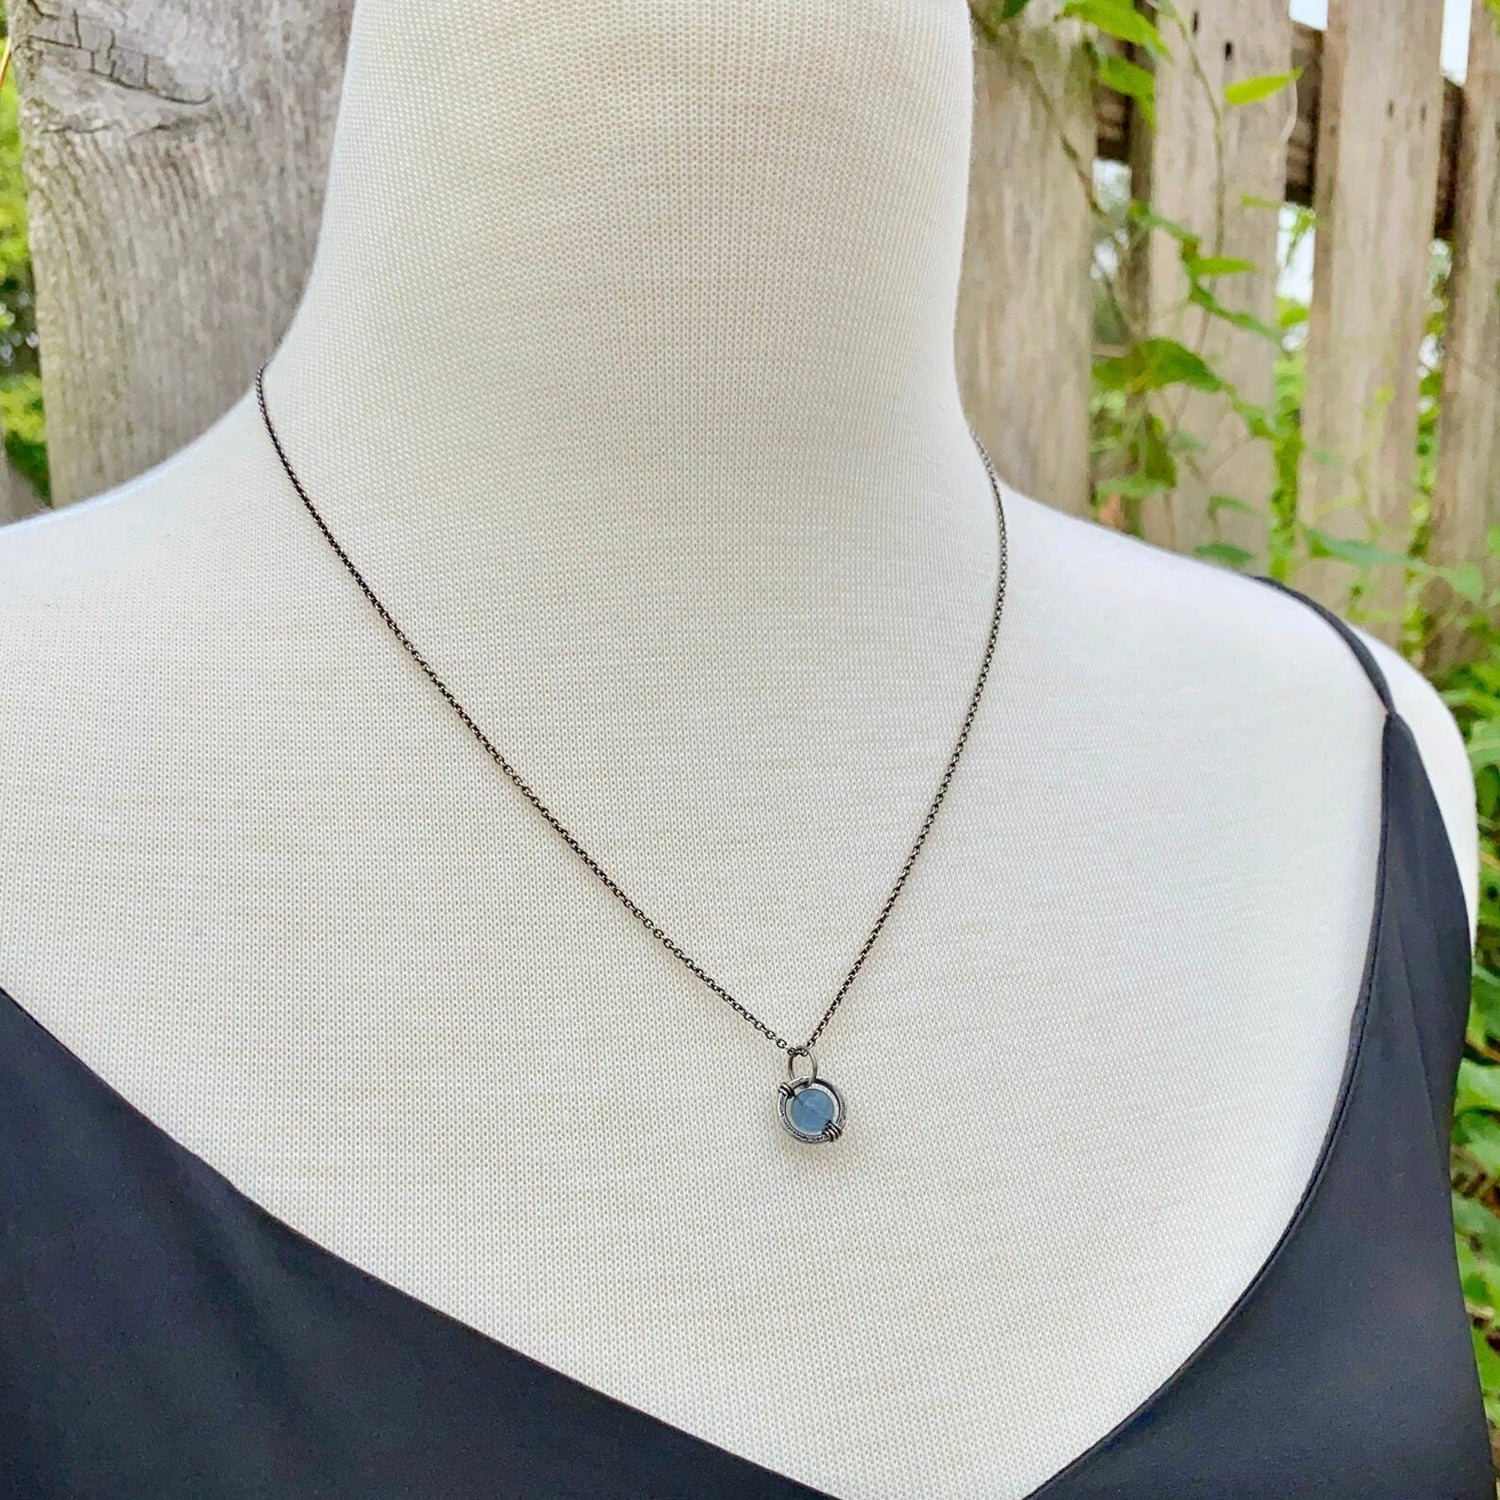 Earthy Blue Fluorite One Bead Necklace, Rustic Sterling Silver Hammered Minimalist Charm with Natural Gemstone, Casual Everyday Style